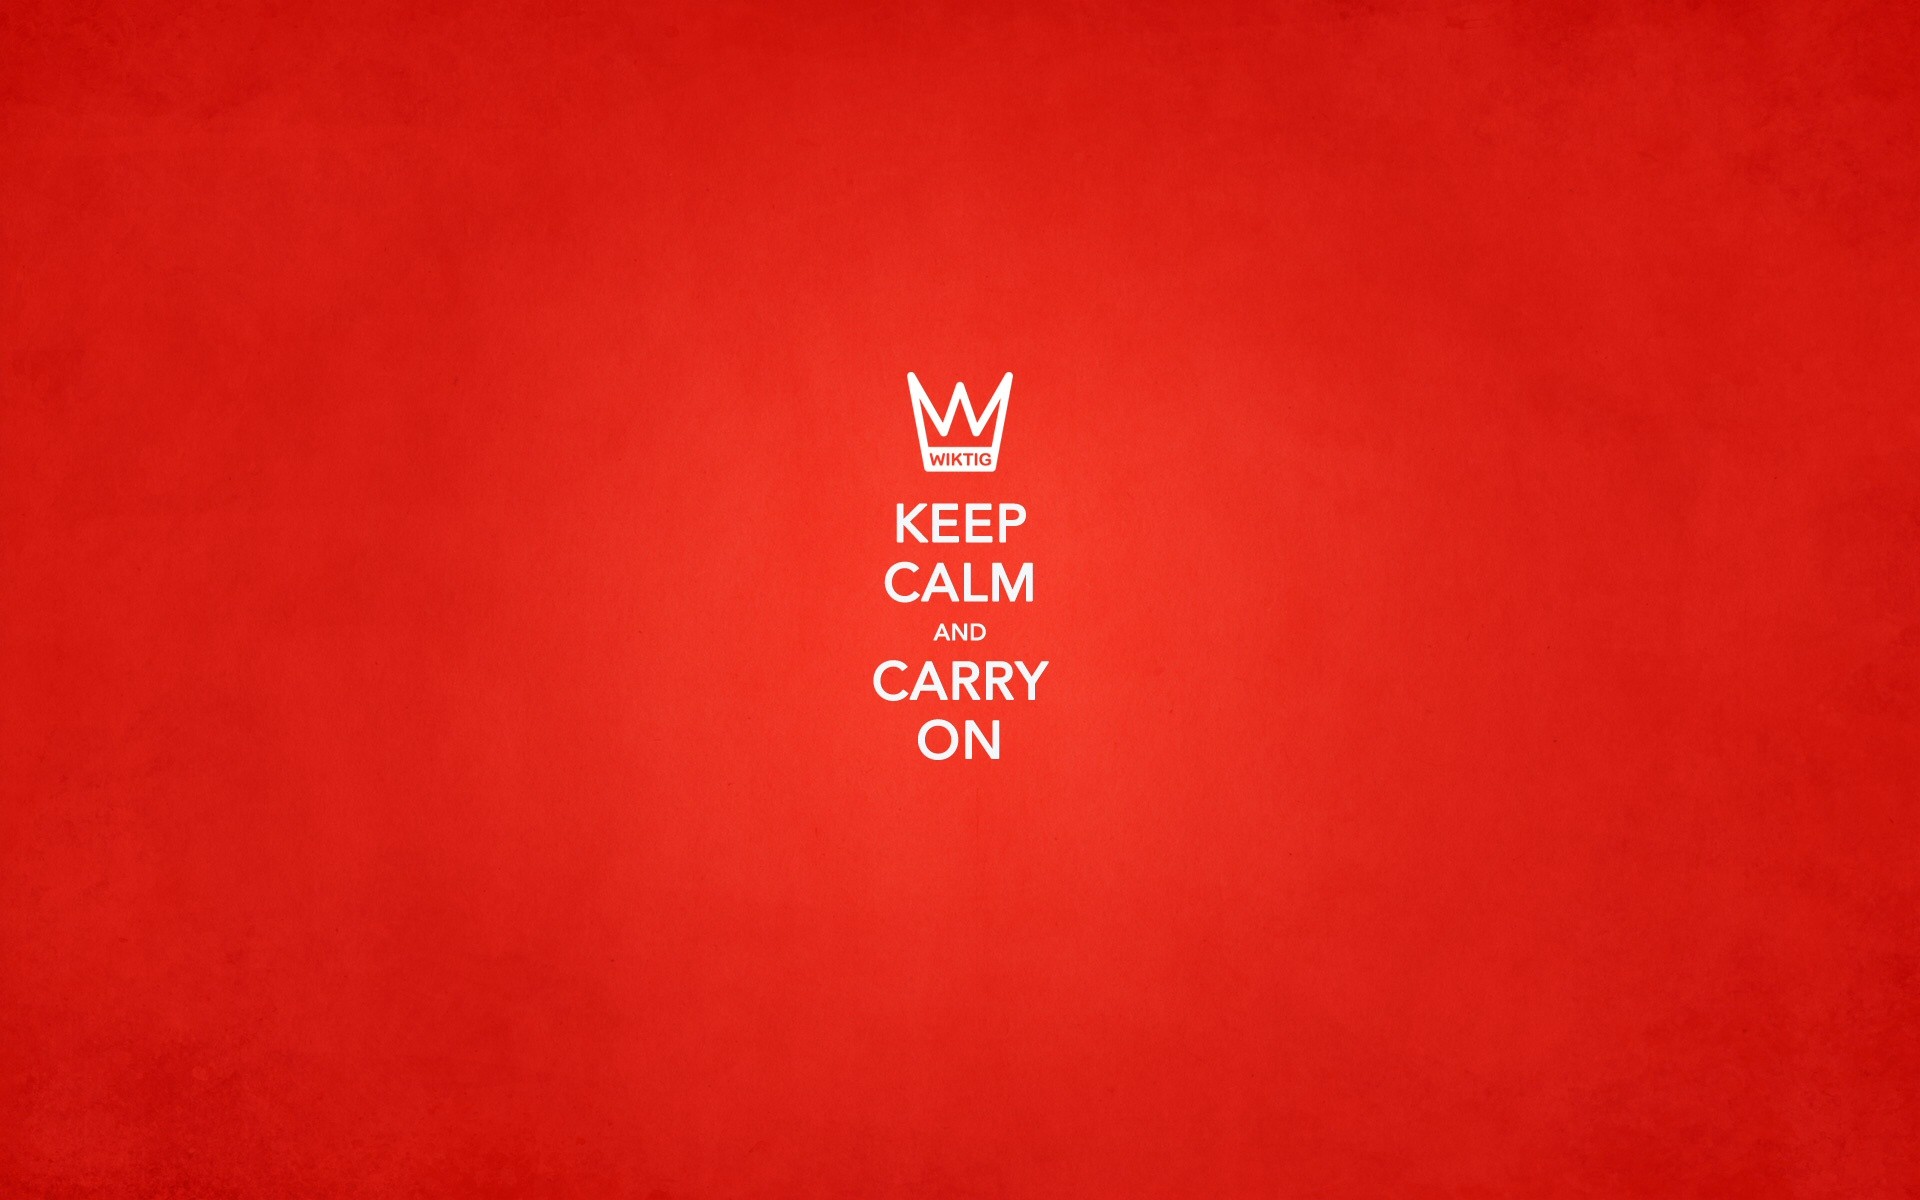 Related Wallpapers from Mechanical Engineering Wallpaper. Keep Calm and Carry